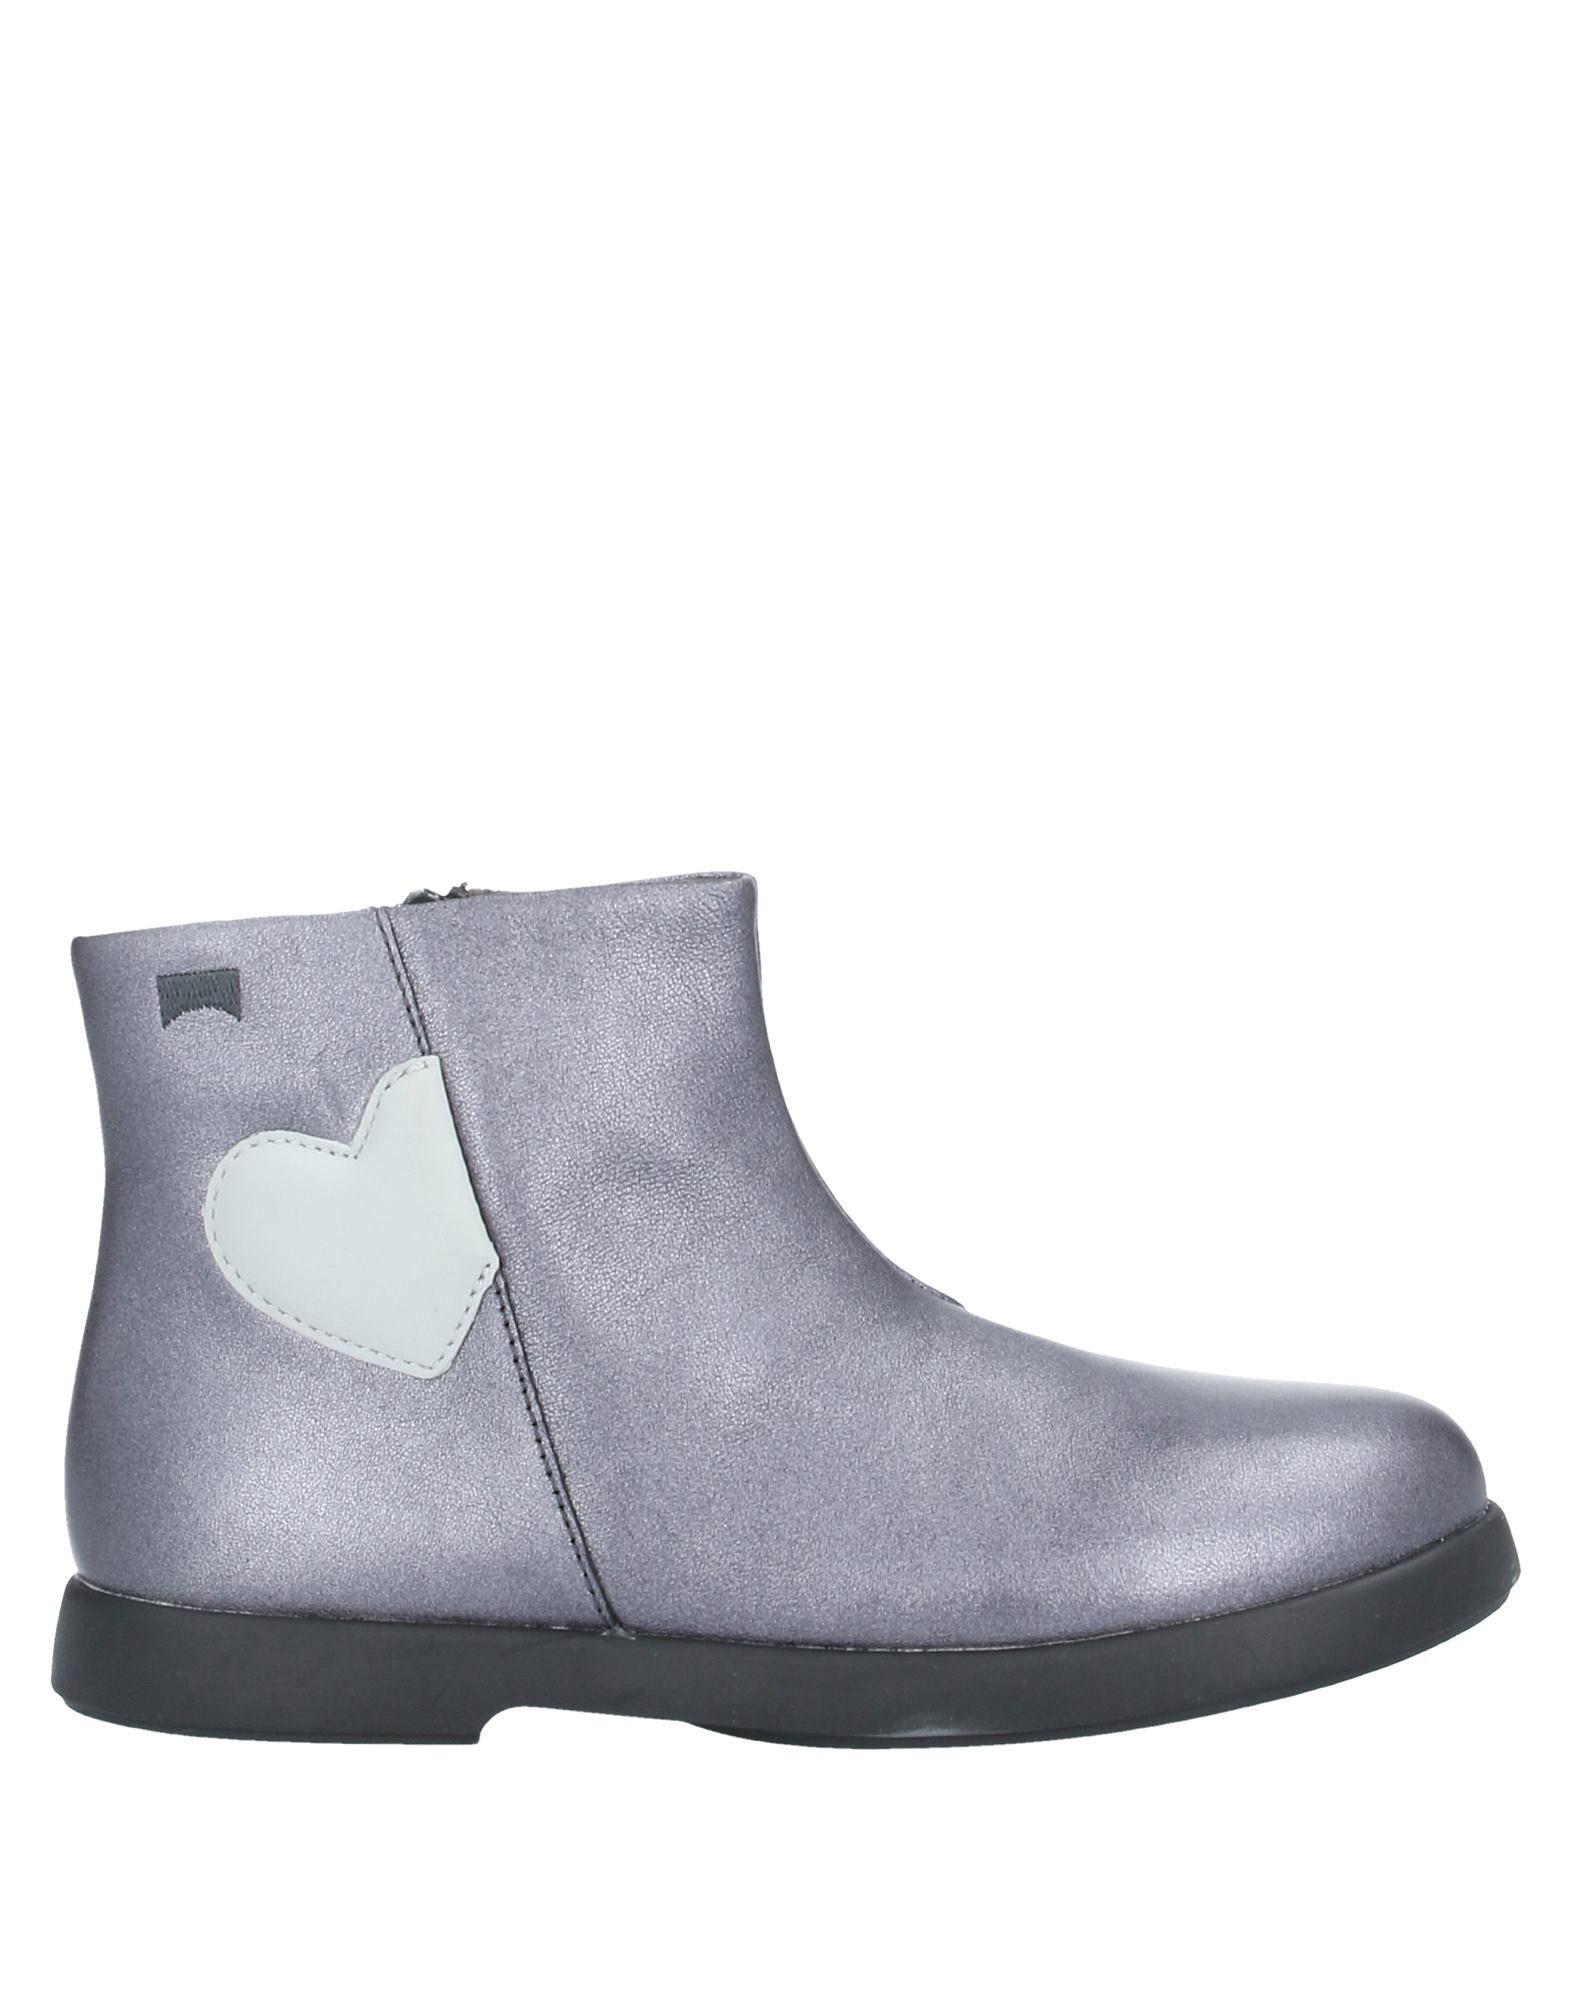 Shop Camper Toddler Girl Ankle Boots Lead Size 9.5c Soft Leather In Grey